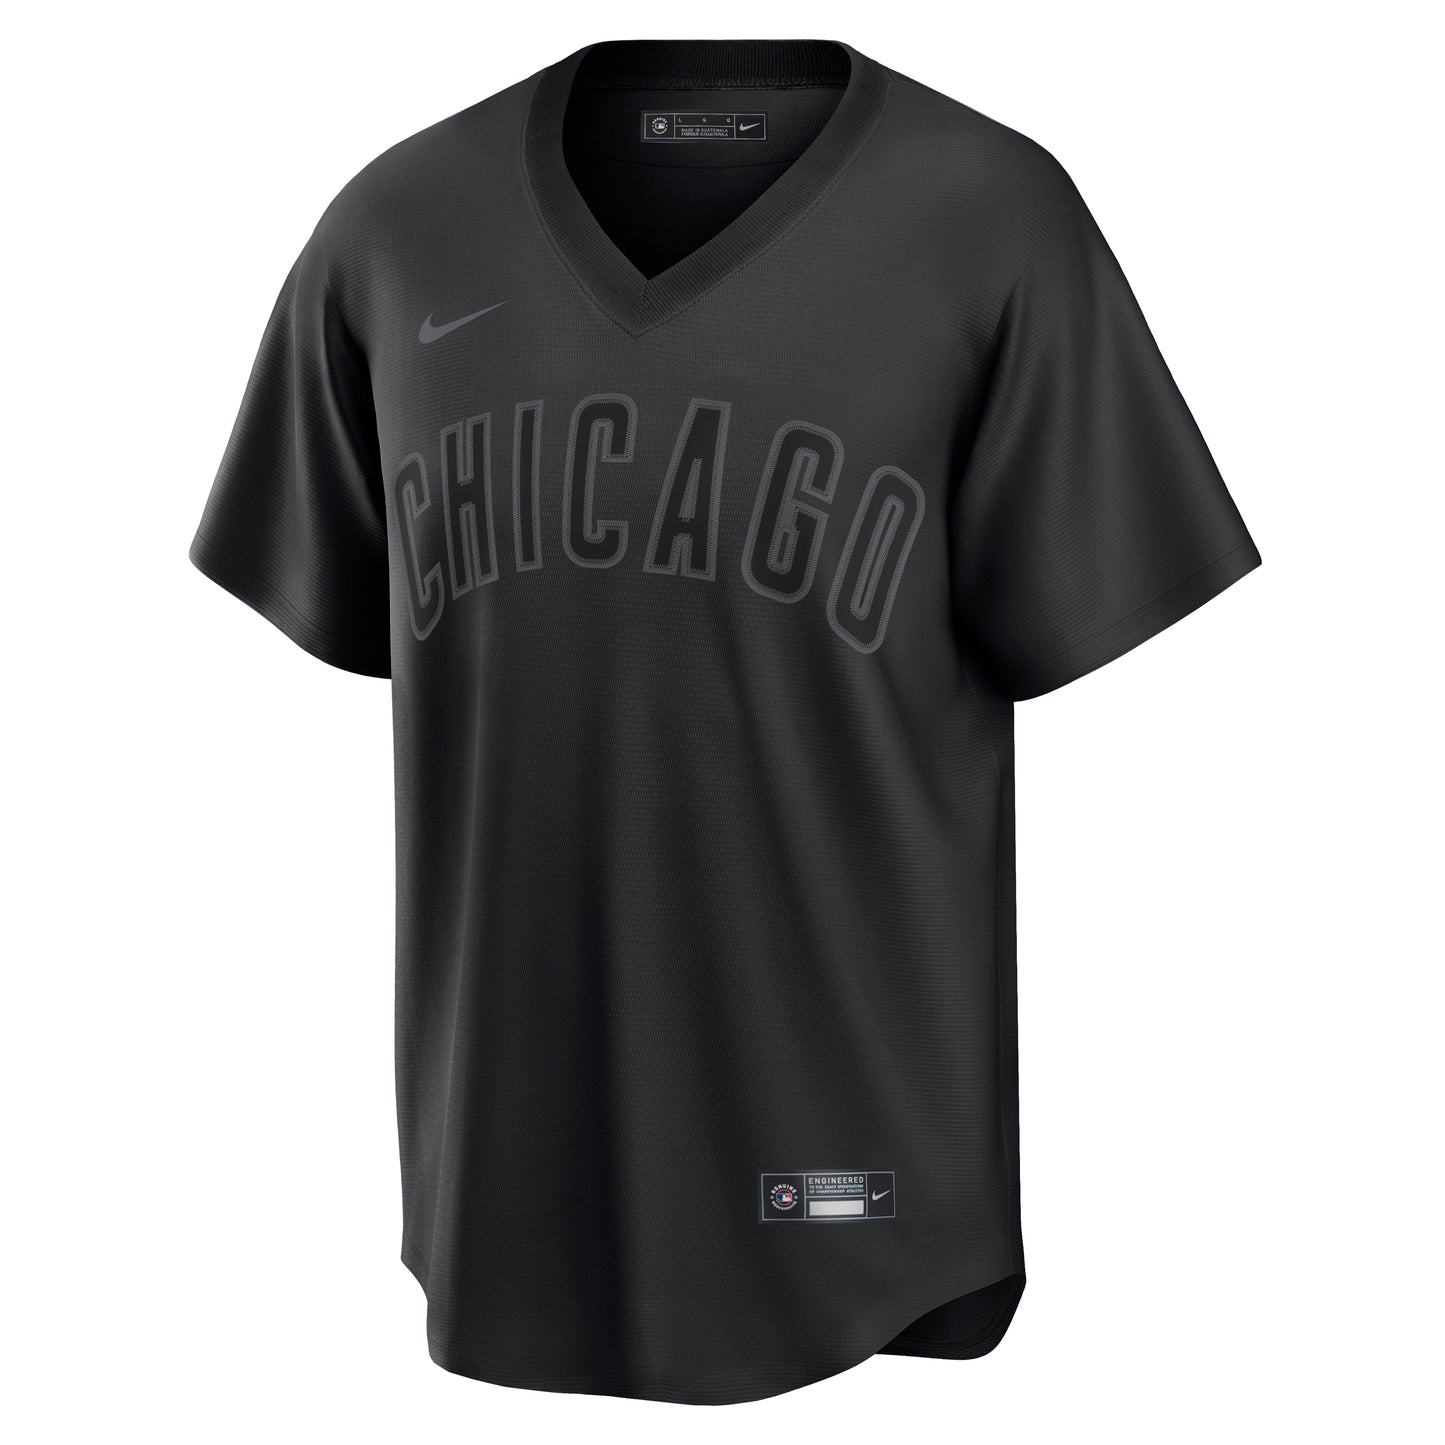 Chicago Cubs Nike Pitch Black Jersey